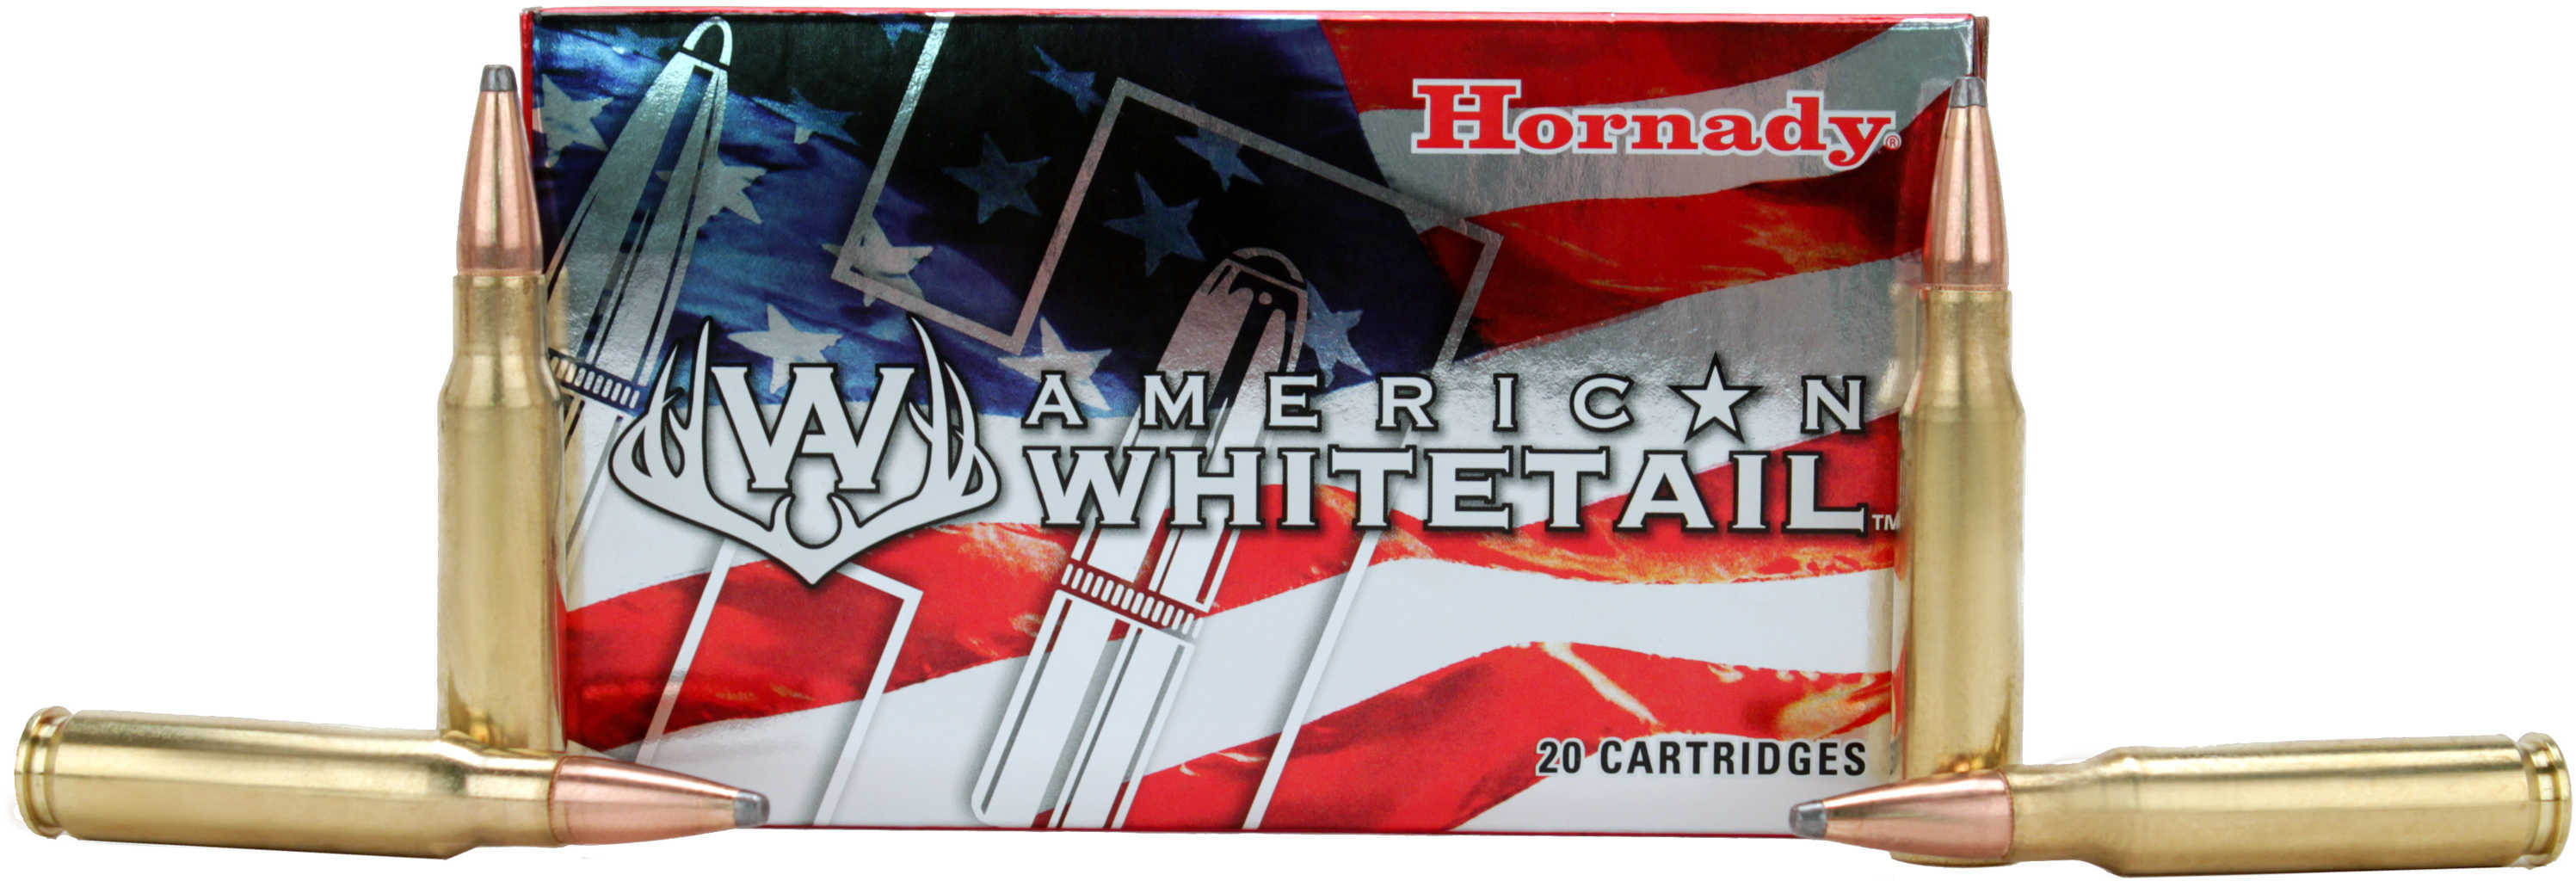 Hornady American Whitetail Rifle Ammunition .308 Win 150 Gr SP 2553 Fps - 20/Box